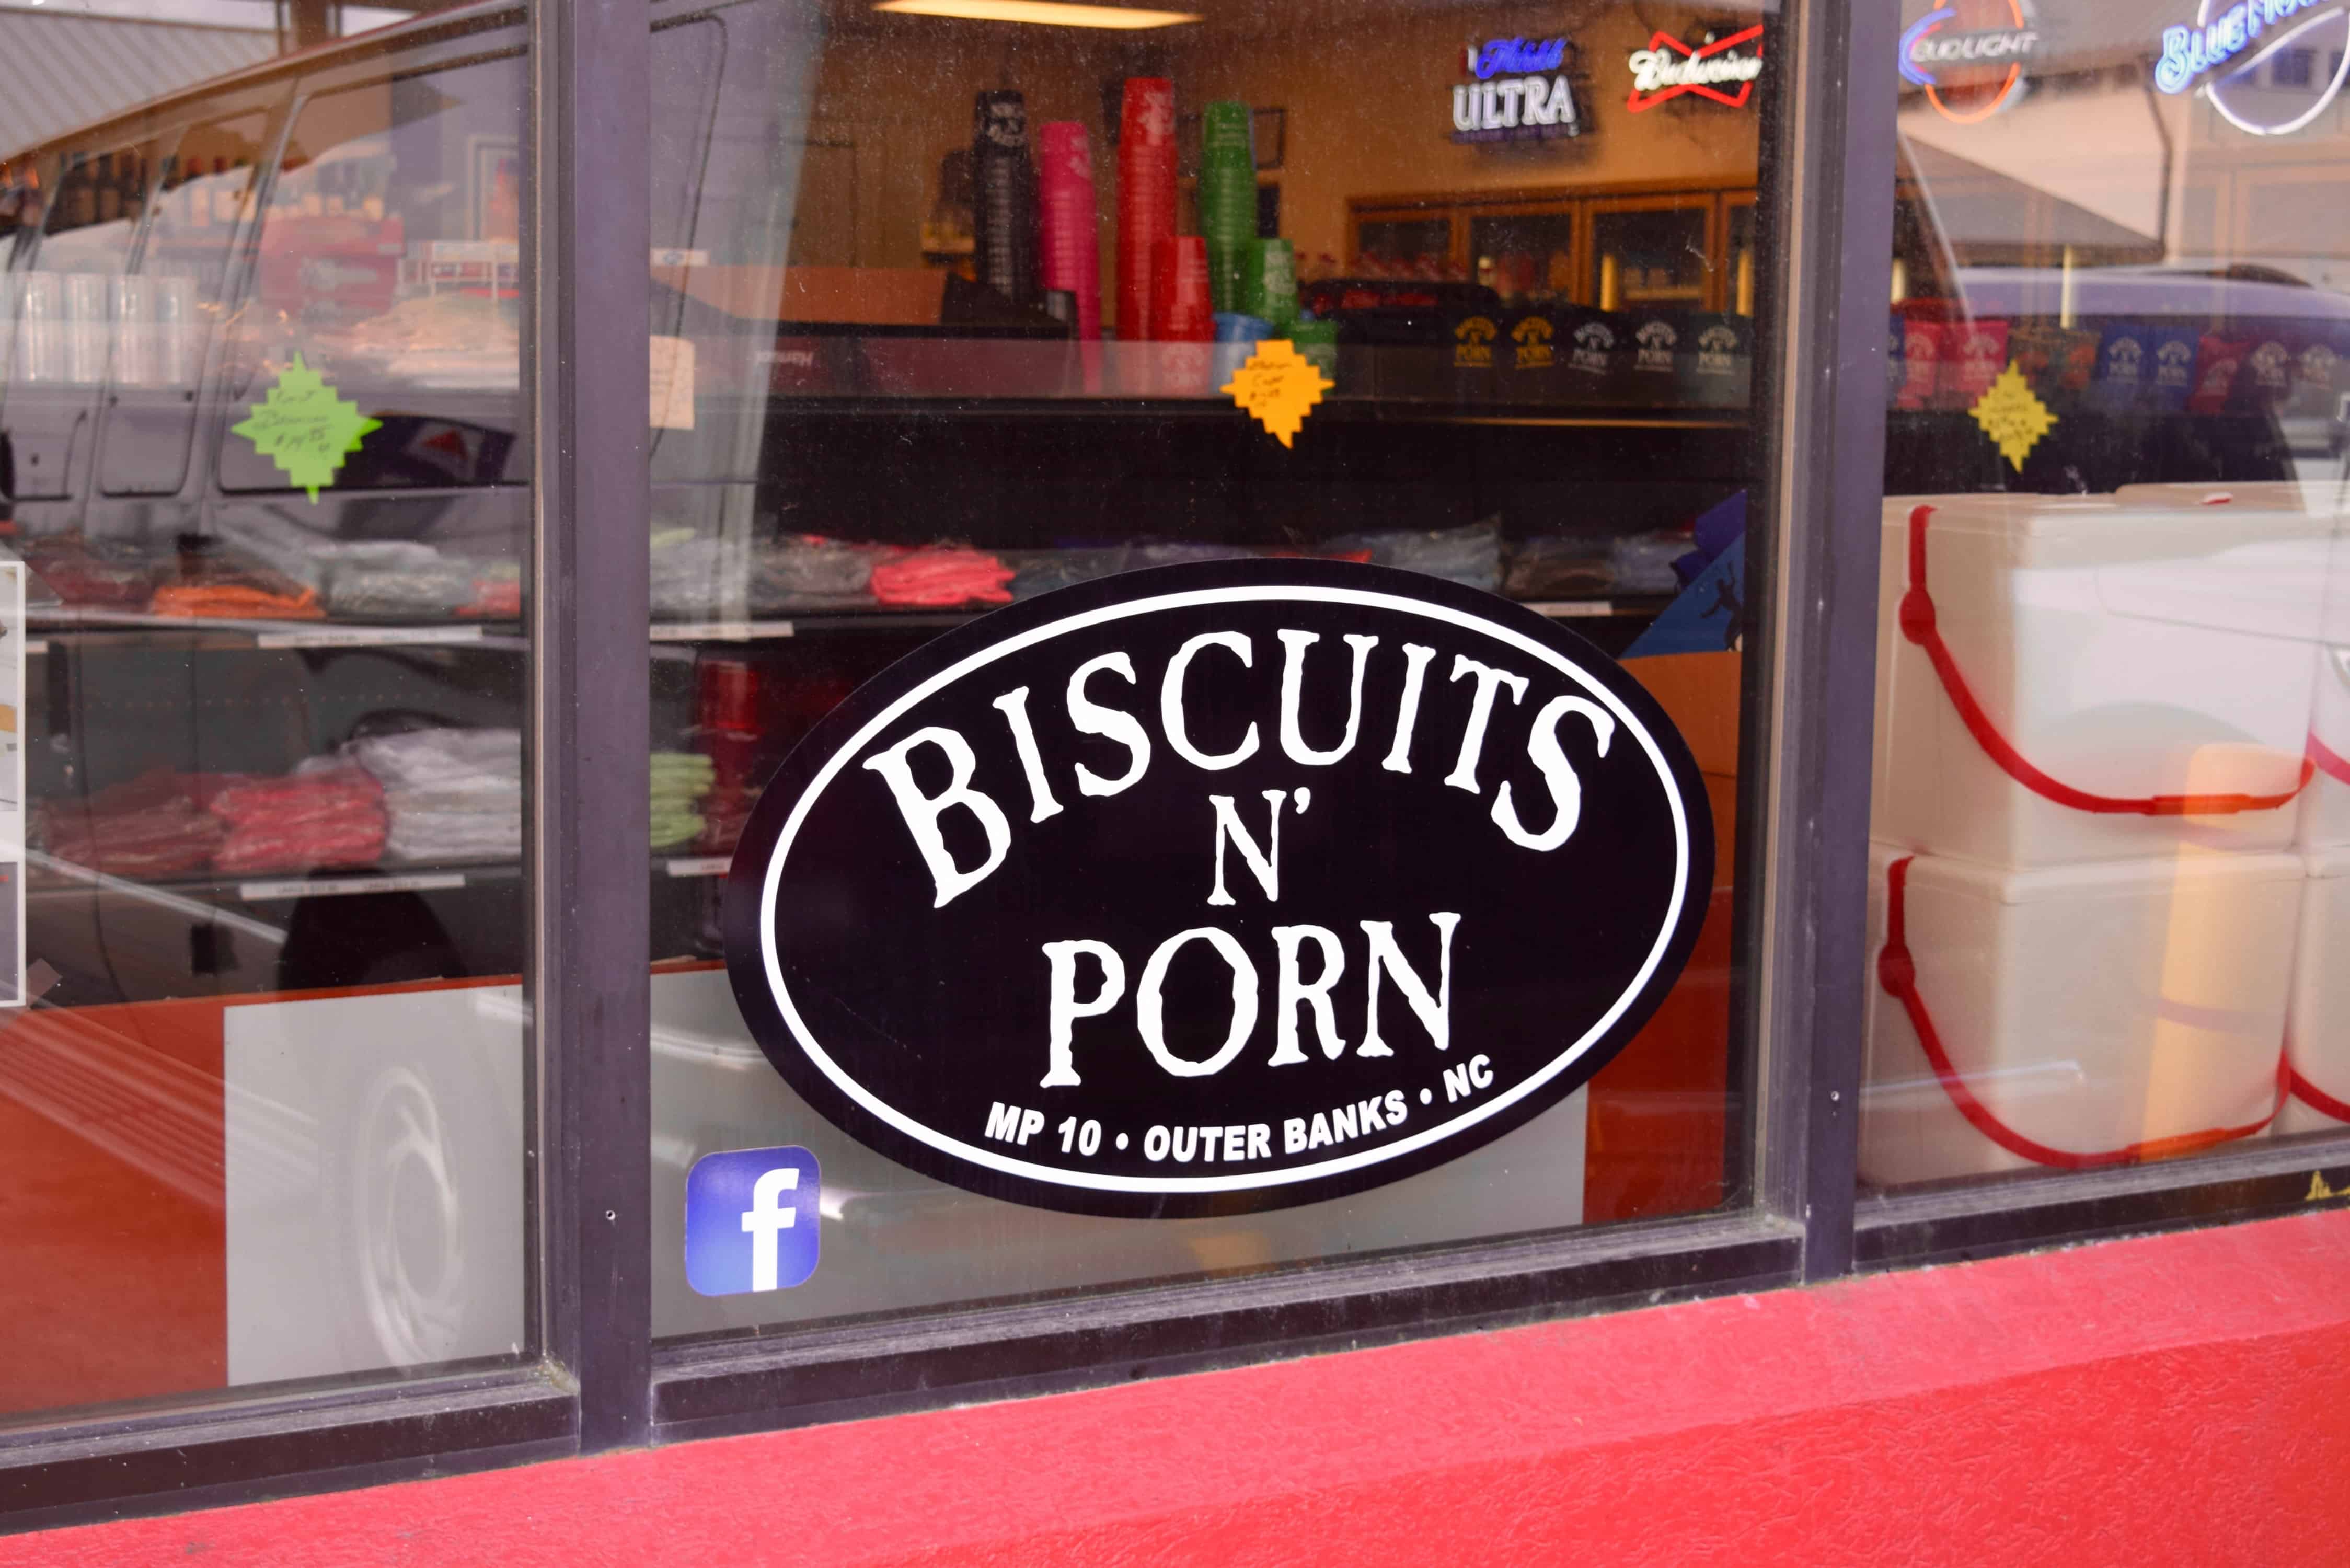 Biscuits N' Porn is an absolute must visit place when you go to Outer Banks. Their buttery biscuits are made in an unassuming gas station and so delicious.Biscuits N' Porn is my number one recommended restaurant in Outer Banks. It's in a gas station on the side of the road, filled with locals and the best breakfast around this beach town.